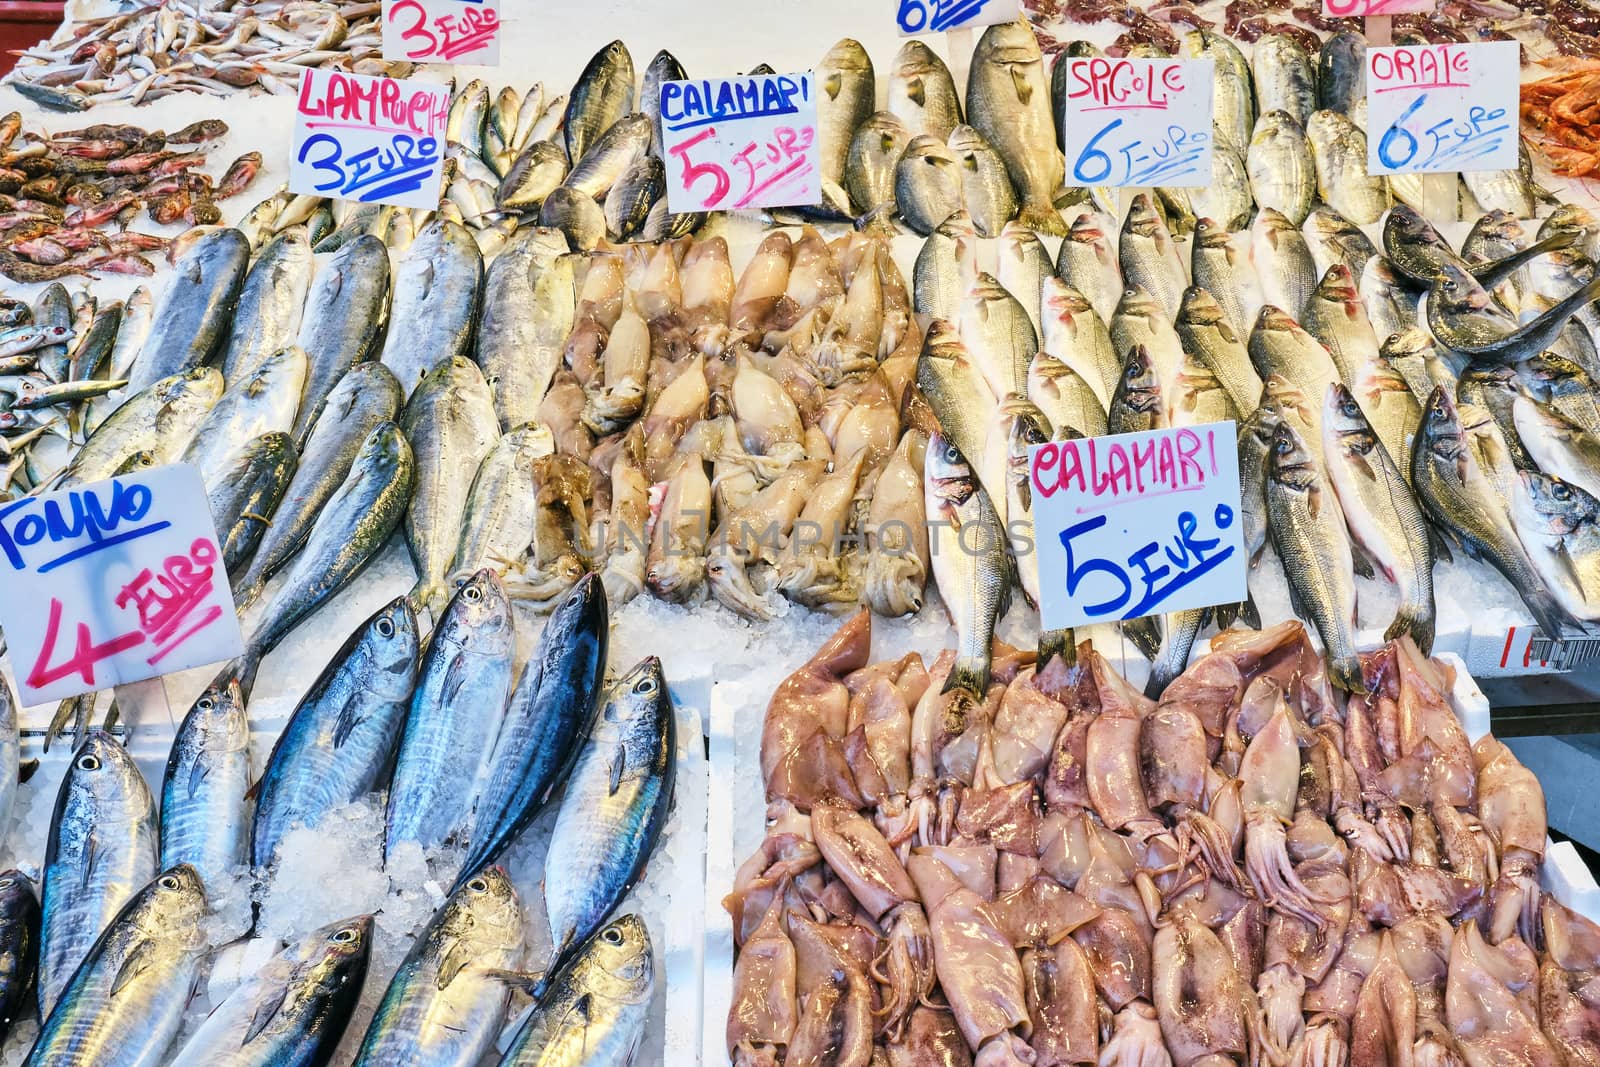 Calamari, fish and seafood for sale at a market in Naples, Italy